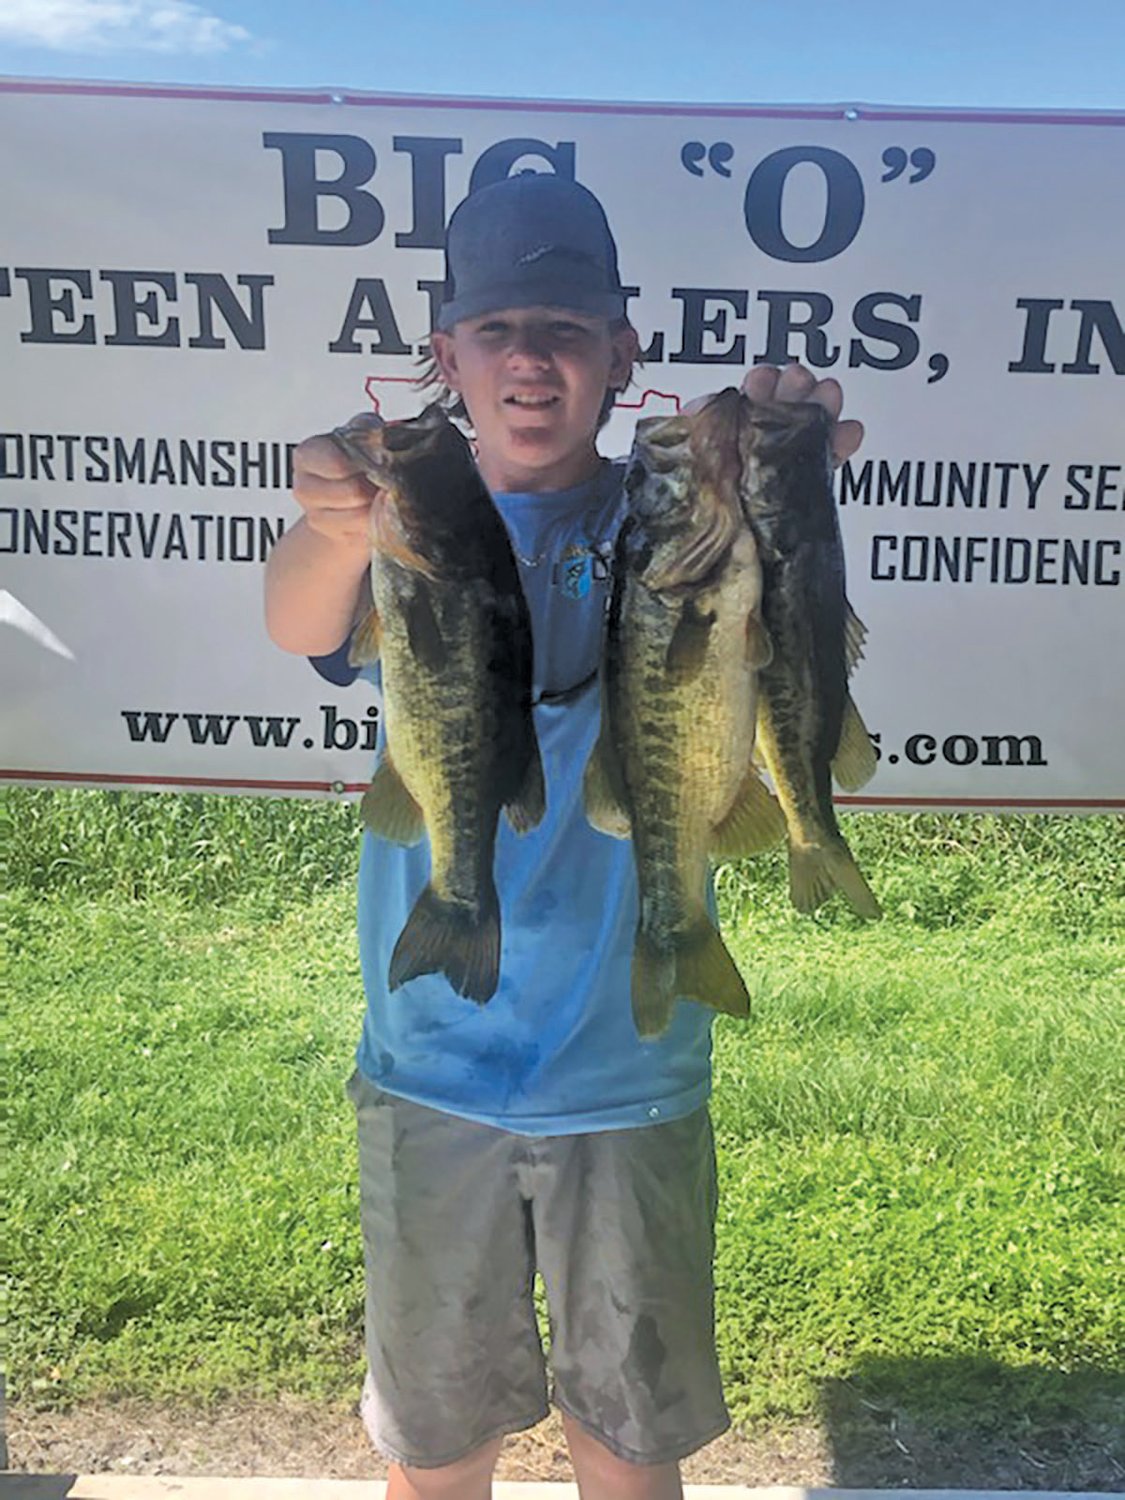 Second place went to Korbyn Lewis with 10.65 lbs.